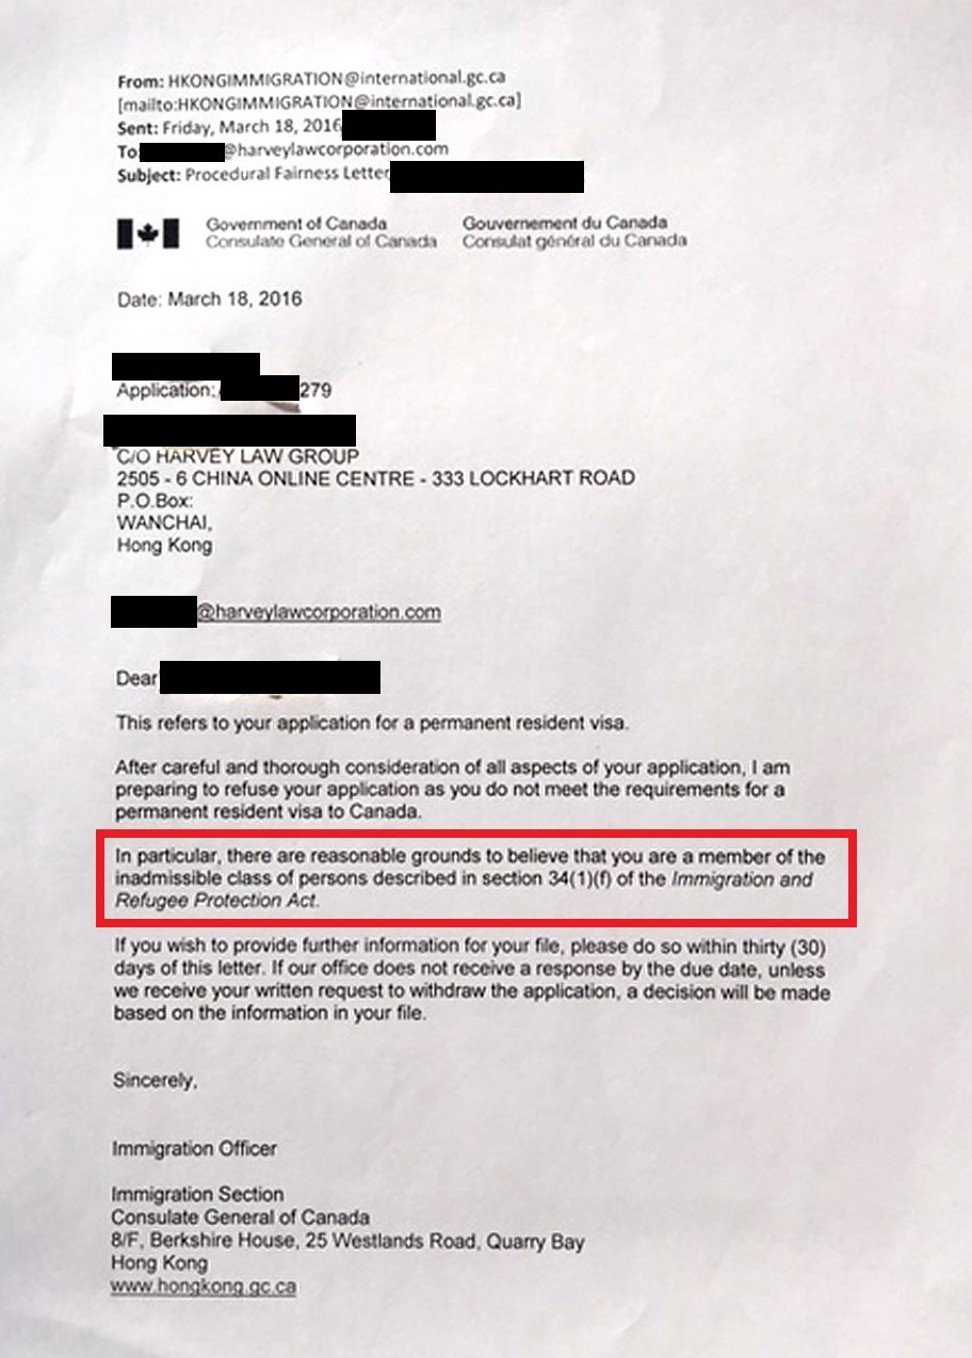 A ‘procedural fairness’ letter to a Huawei employee shows that Canadian immigration officer JW00237 tried to reject them on the basis that they were suspected of espionage on March 18, 2016. Graphic: SCMP